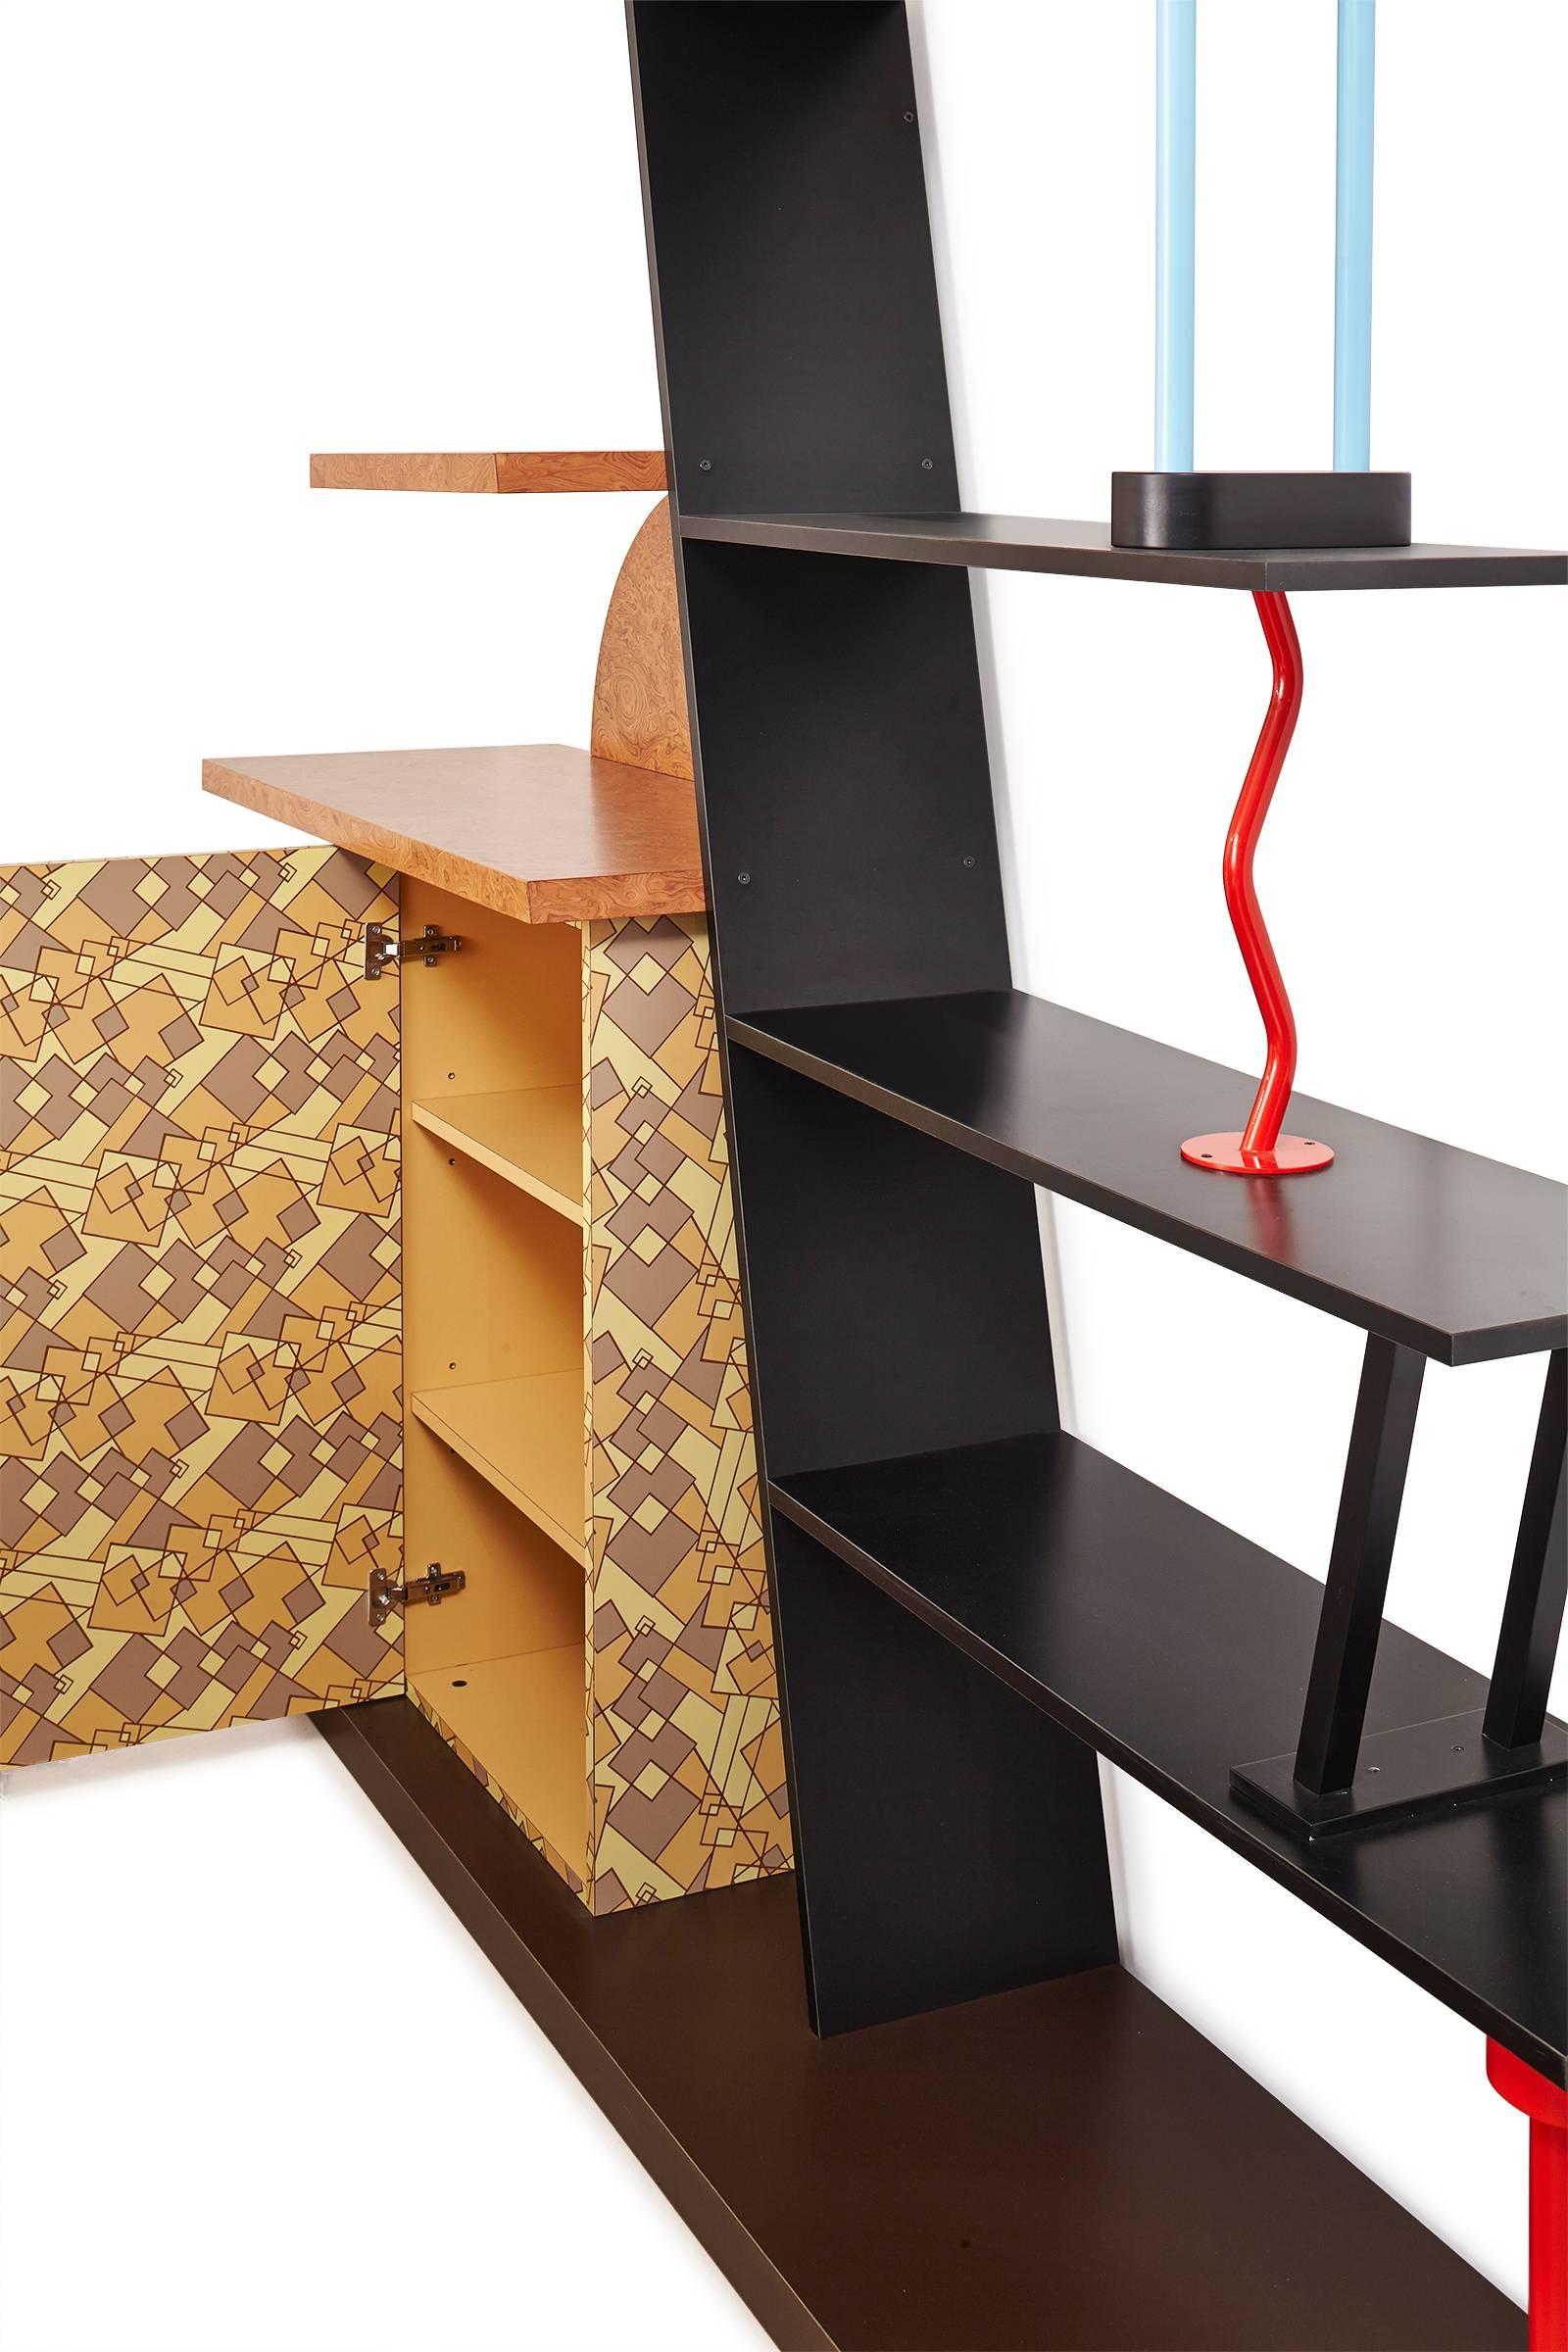 The piece consists of six shelves with a one-door cupboard decorated in plastic laminate with a geometric pattern. Its form is made up of both straight and curved lines punctuated by diagonal and zigzag structural elements. 

Malabar is a perfect